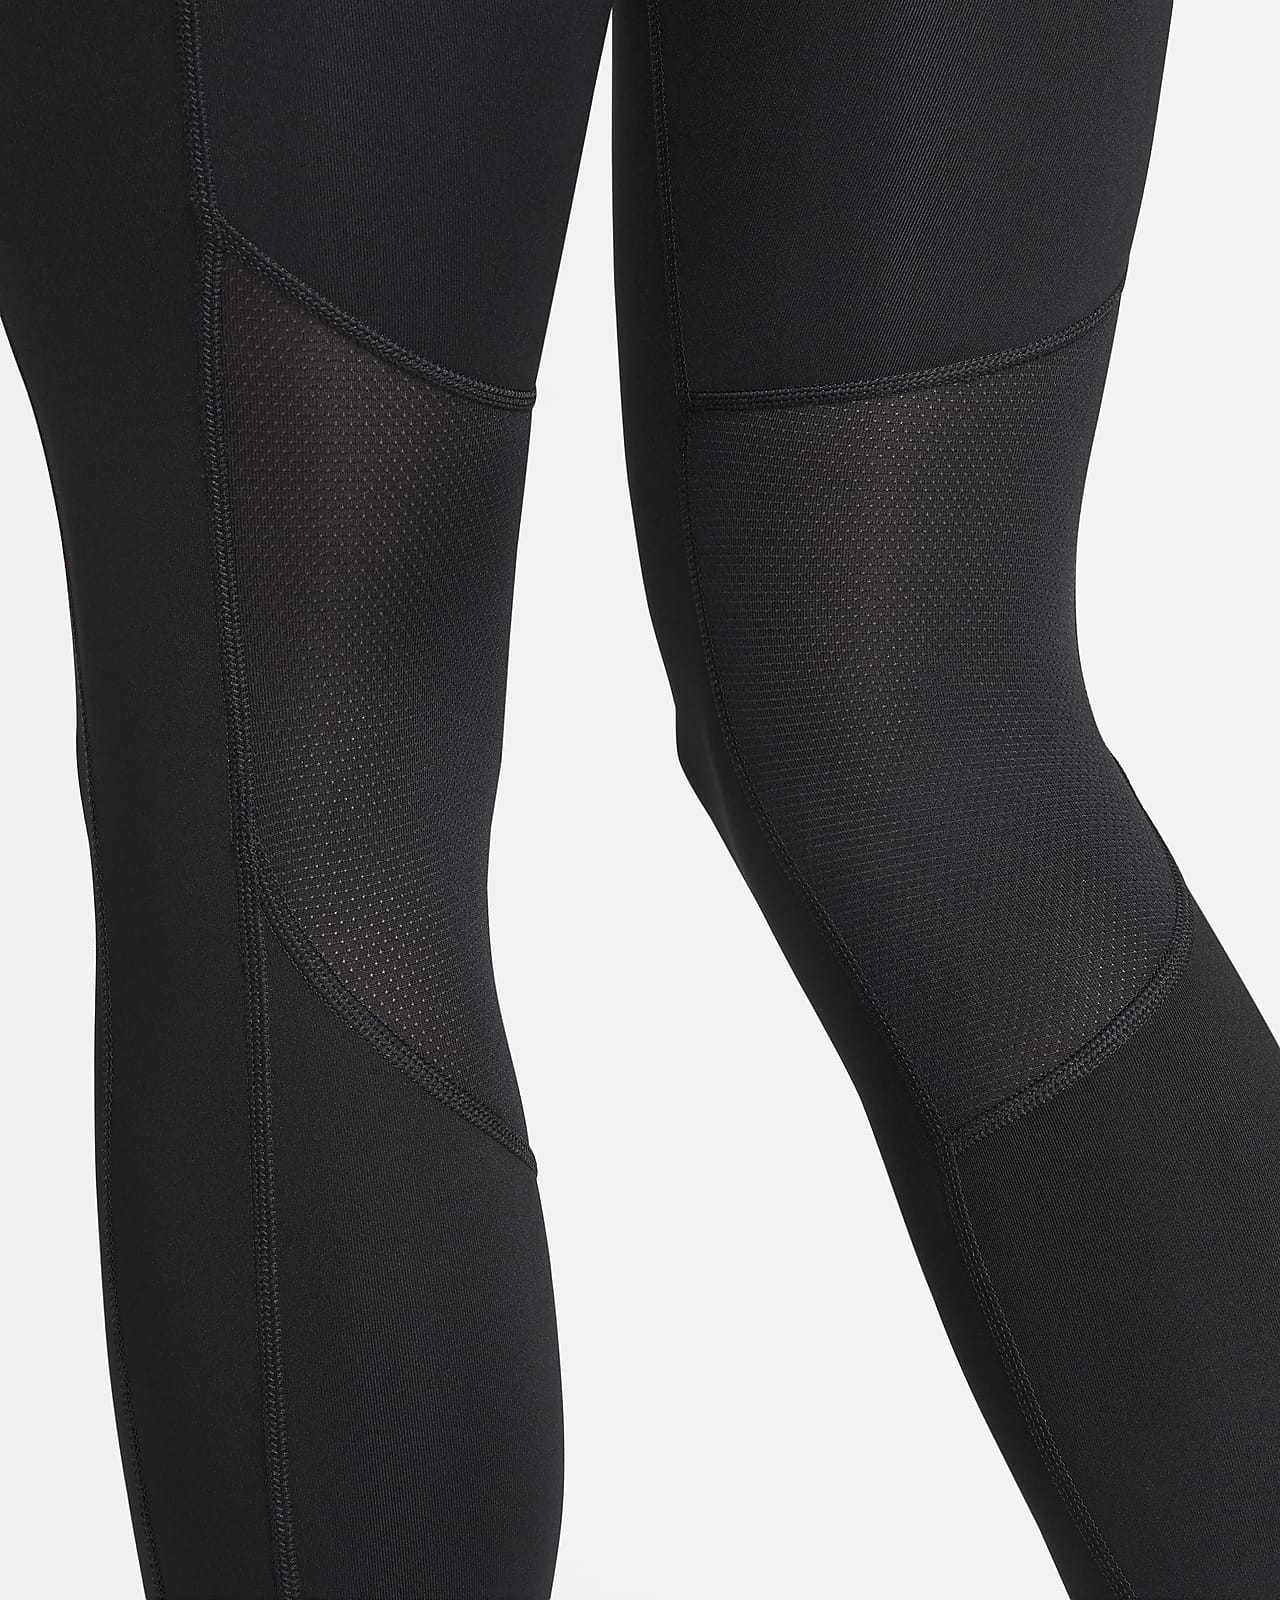 Nike Fast Women's Mid-Rise 7/8 Running Leggings with Pockets. Nike CA